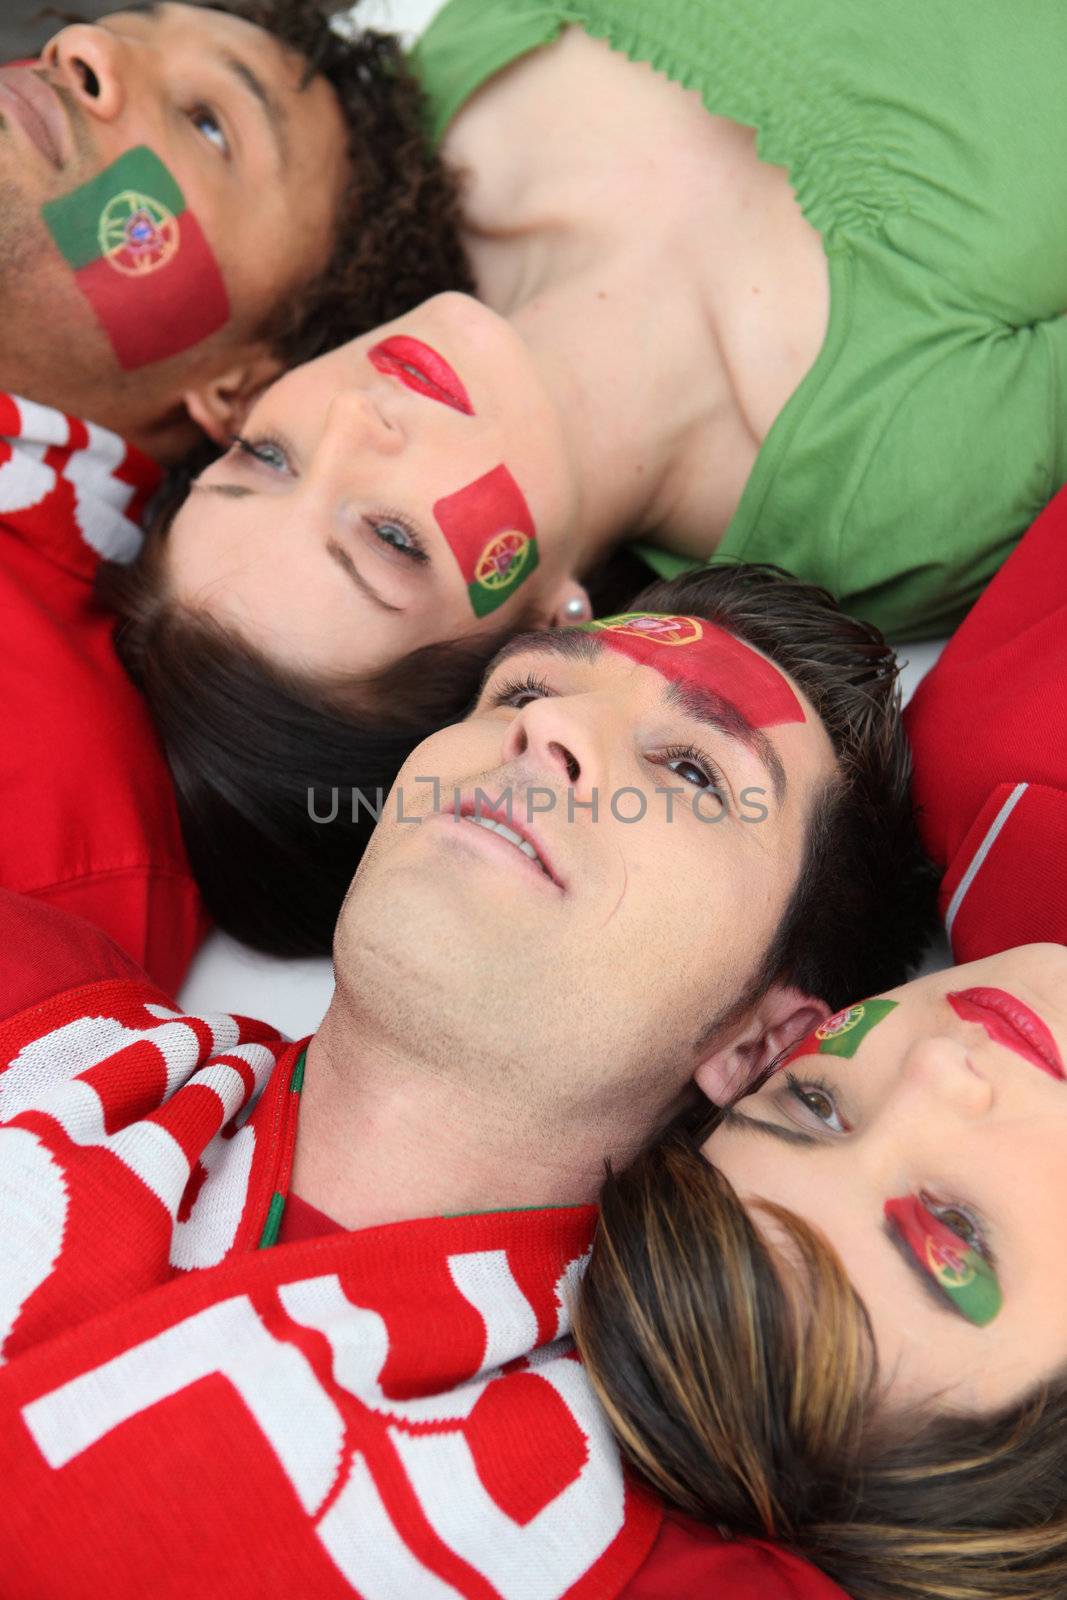 Supporters of Portugal lying on the floor